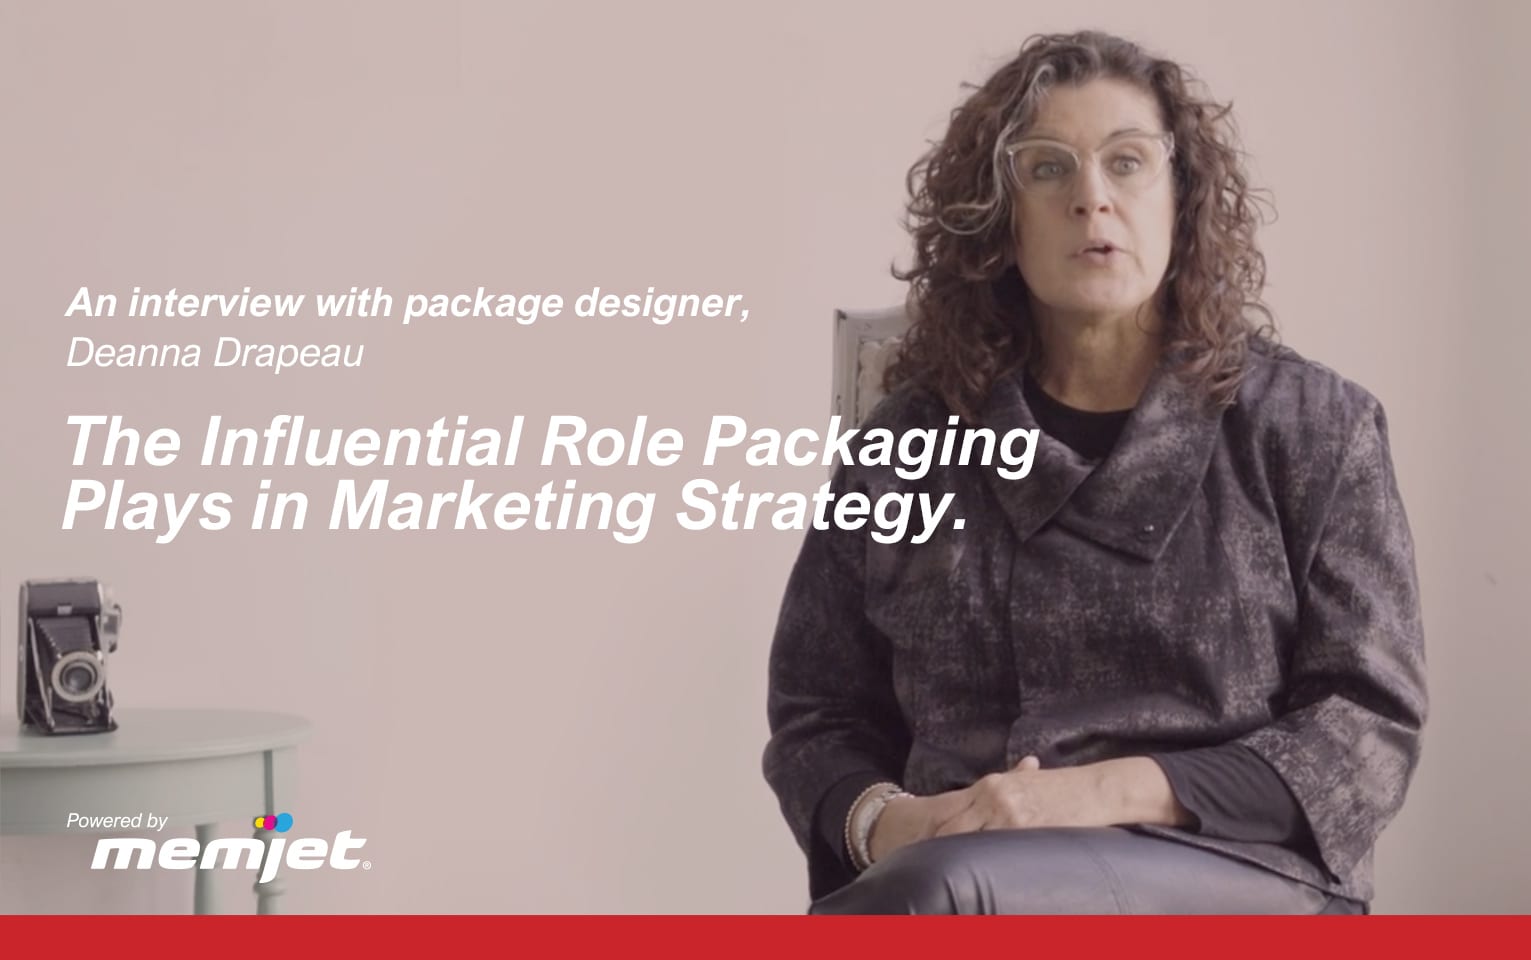 The Influential Role Packaging Plays in Marketing Strategy